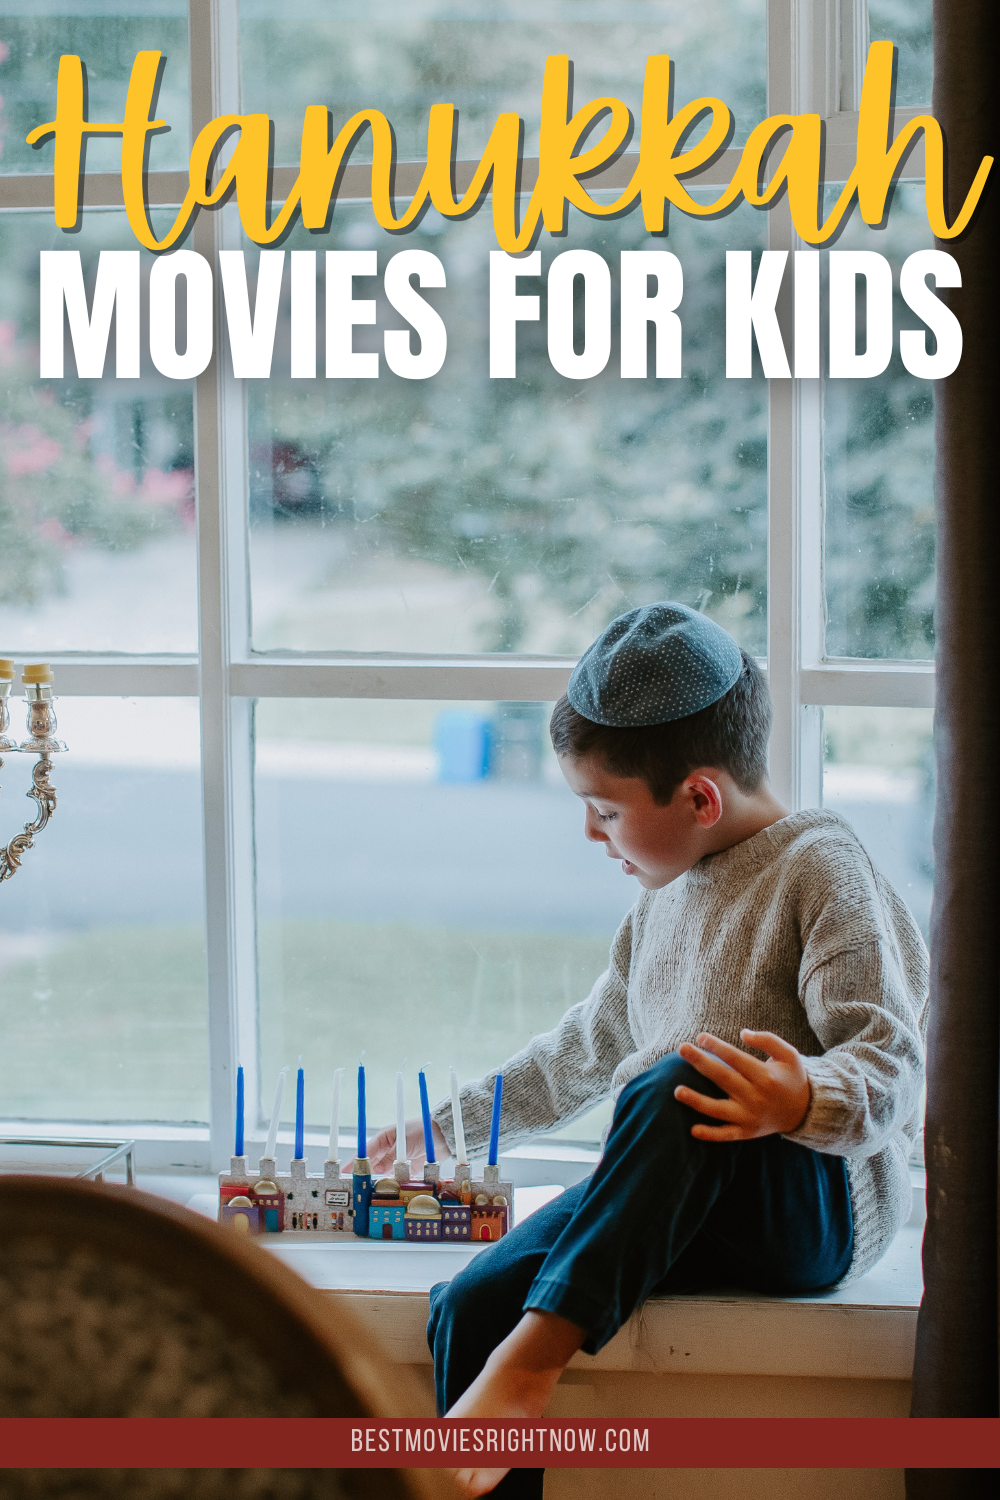 Kid sitting on the window with Hanukkah candle near him with text: 